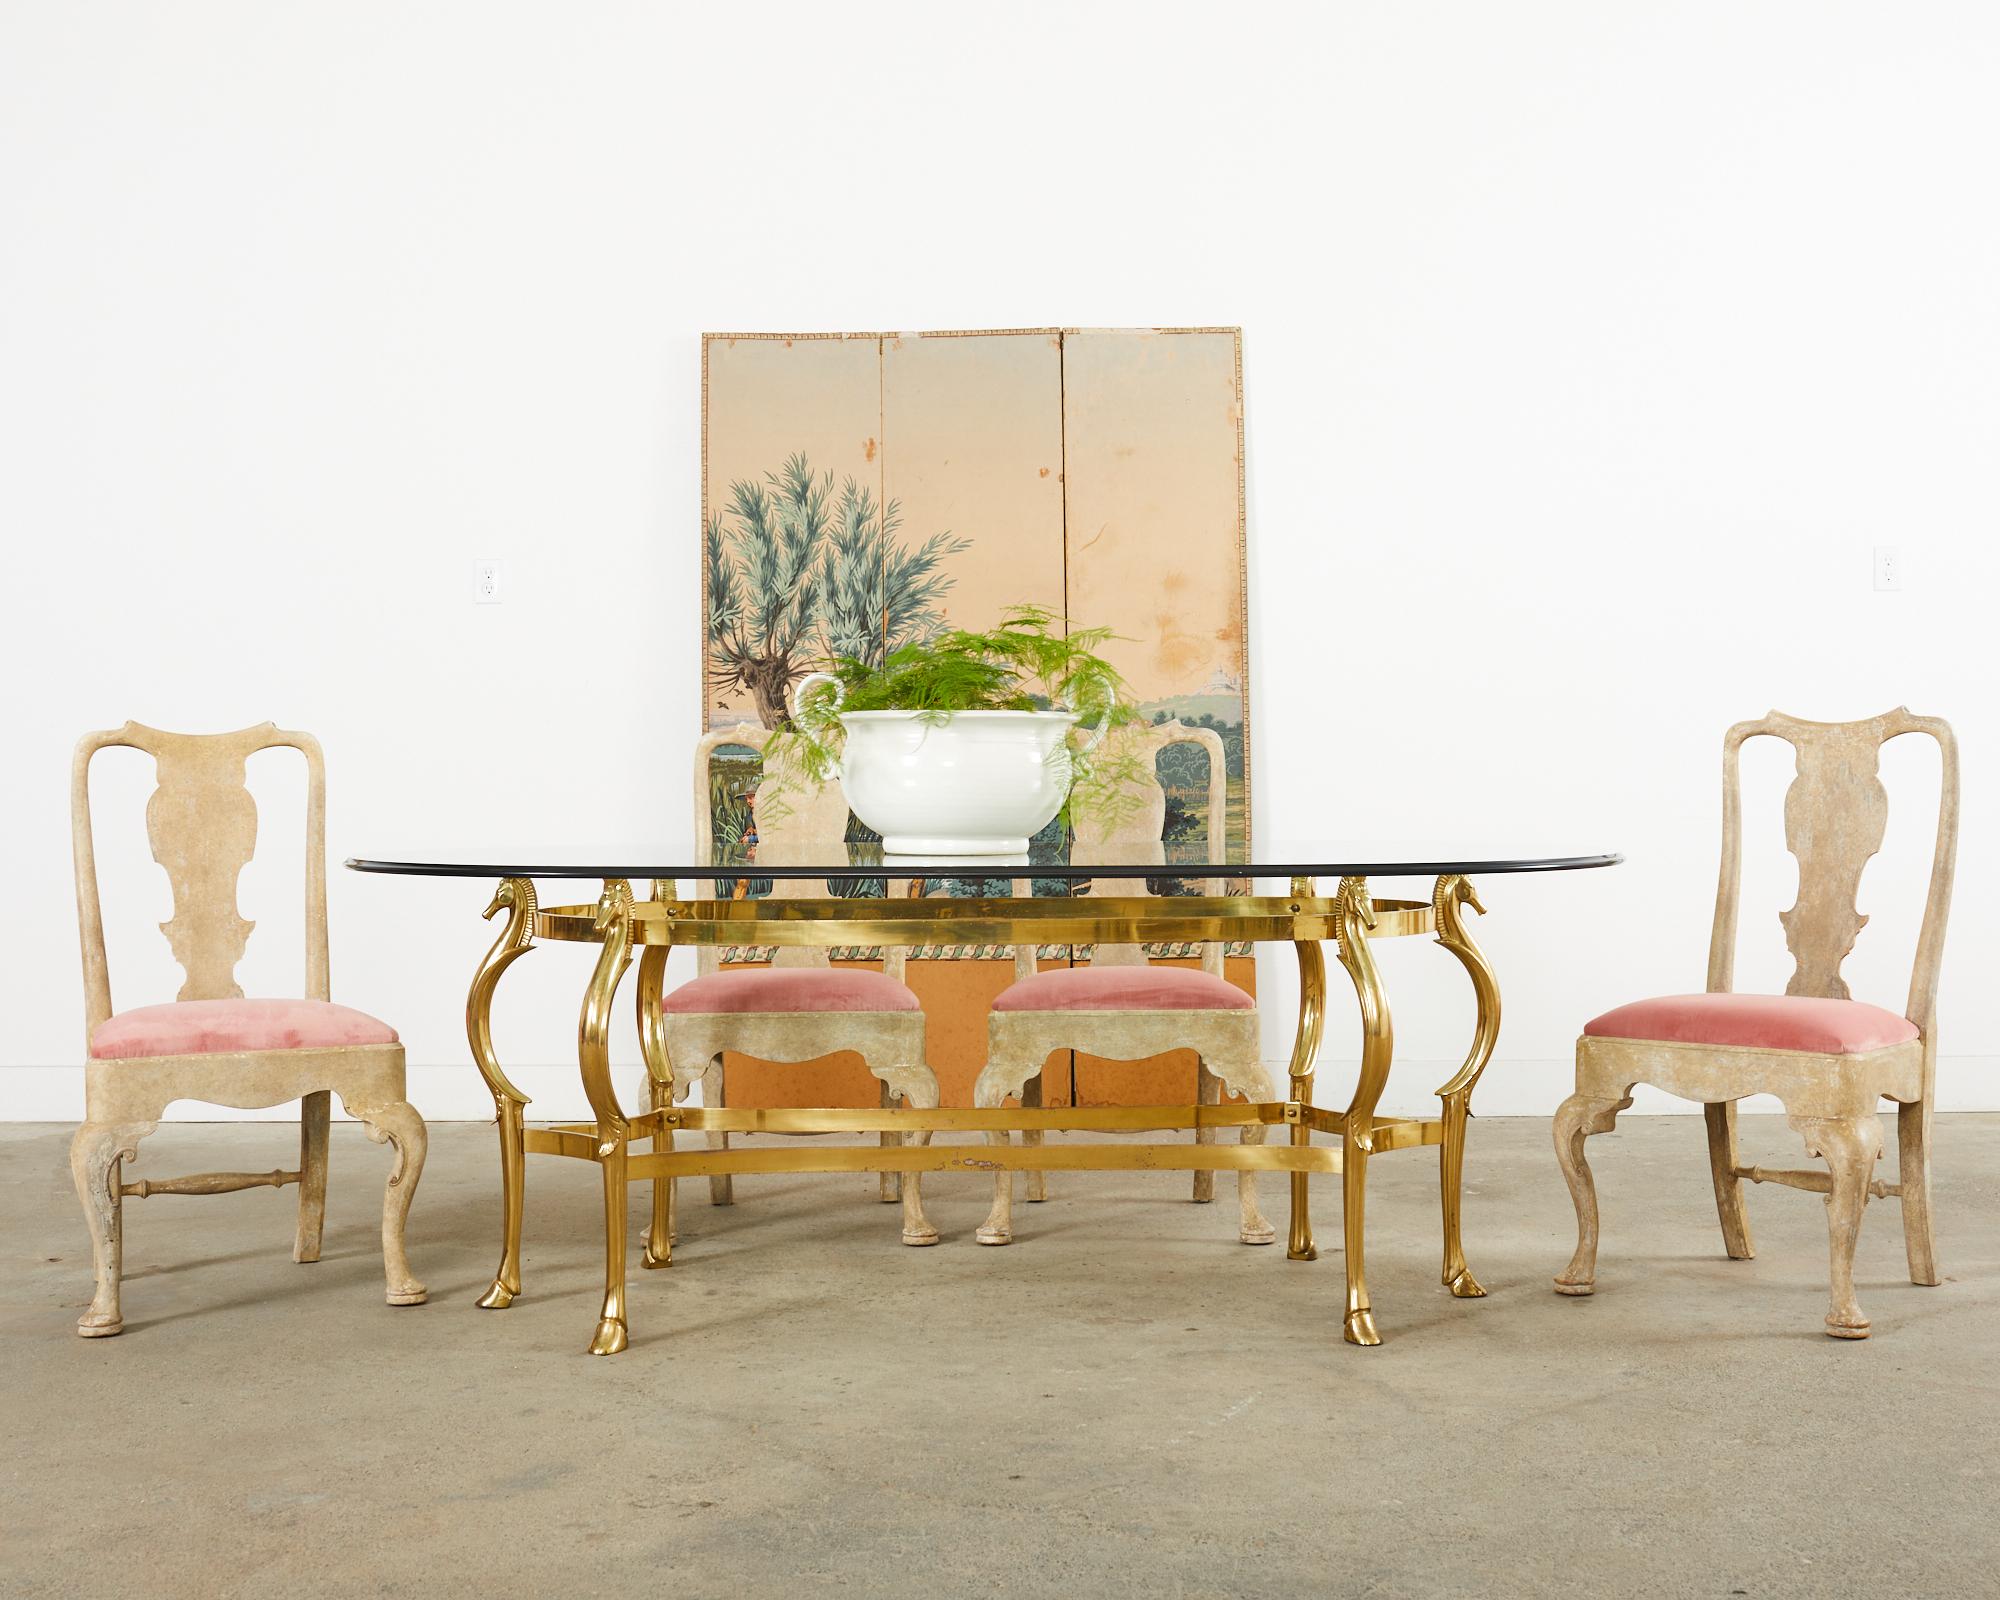 Amazing set of six bespoke dining chairs by A. Rudin Hollywood, CA. The chairs feature an 18th century Queen Anne or baroque style frames. The frames have a lime washed intentionally distressed or pickled finish on the beech wood. Heavy and solid